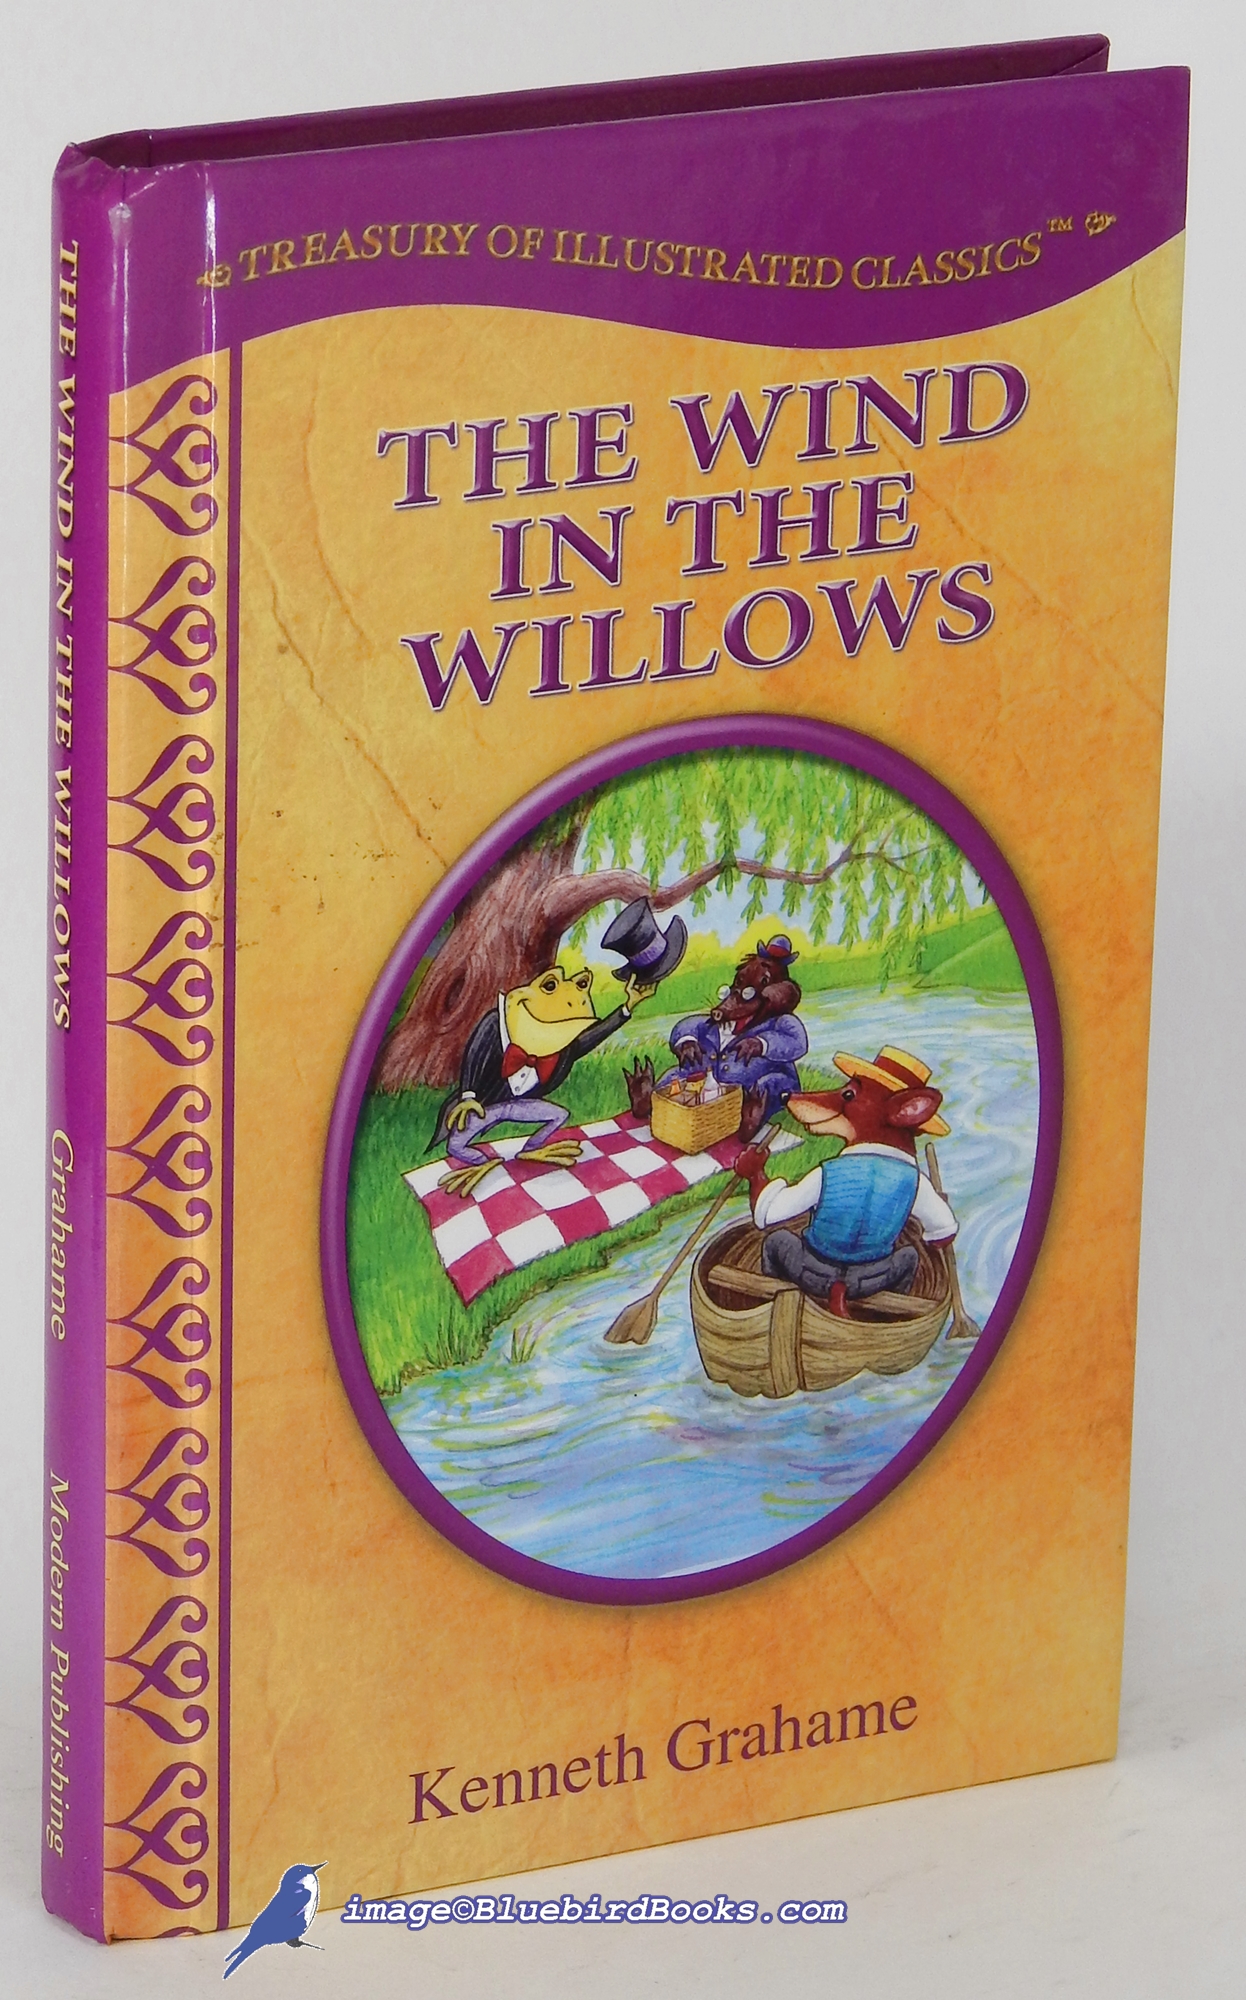 GRAHAME, KENNETH; VITTIGLIO, NICOLE - The Wind in the Willows (Treasury of Illustrated Classics Series)